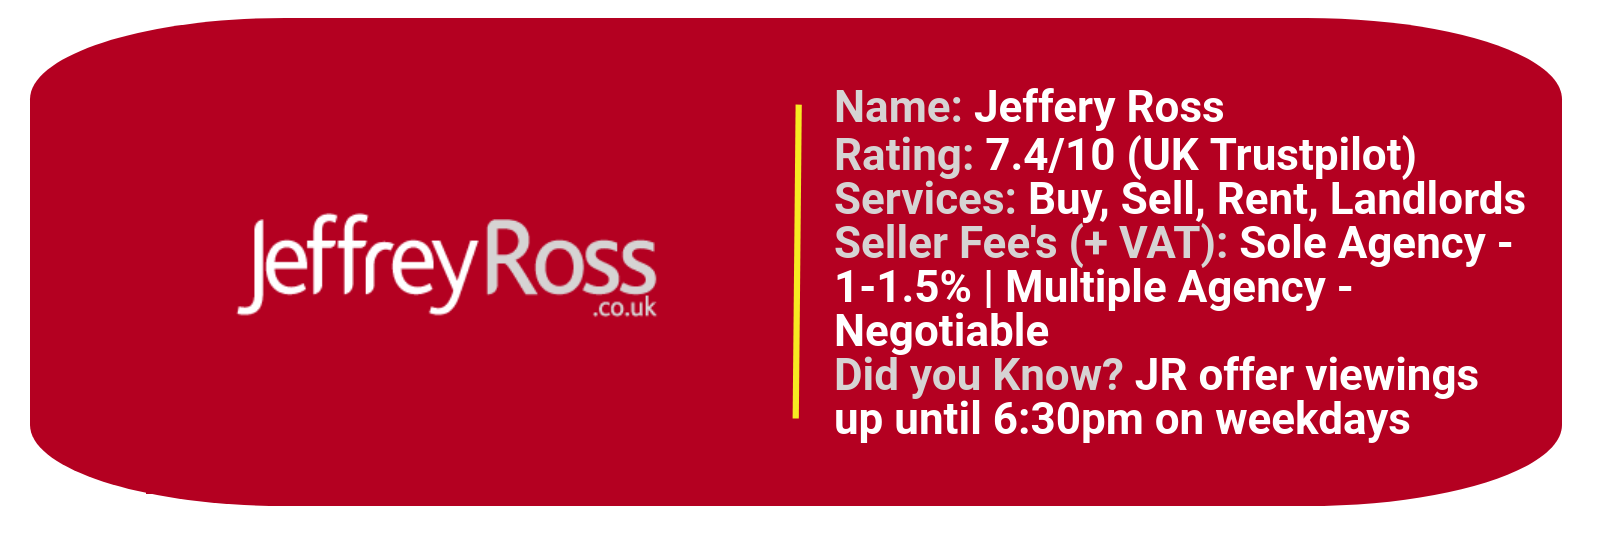 Jeffery Ross statistics featuring rating, services & seller fee's